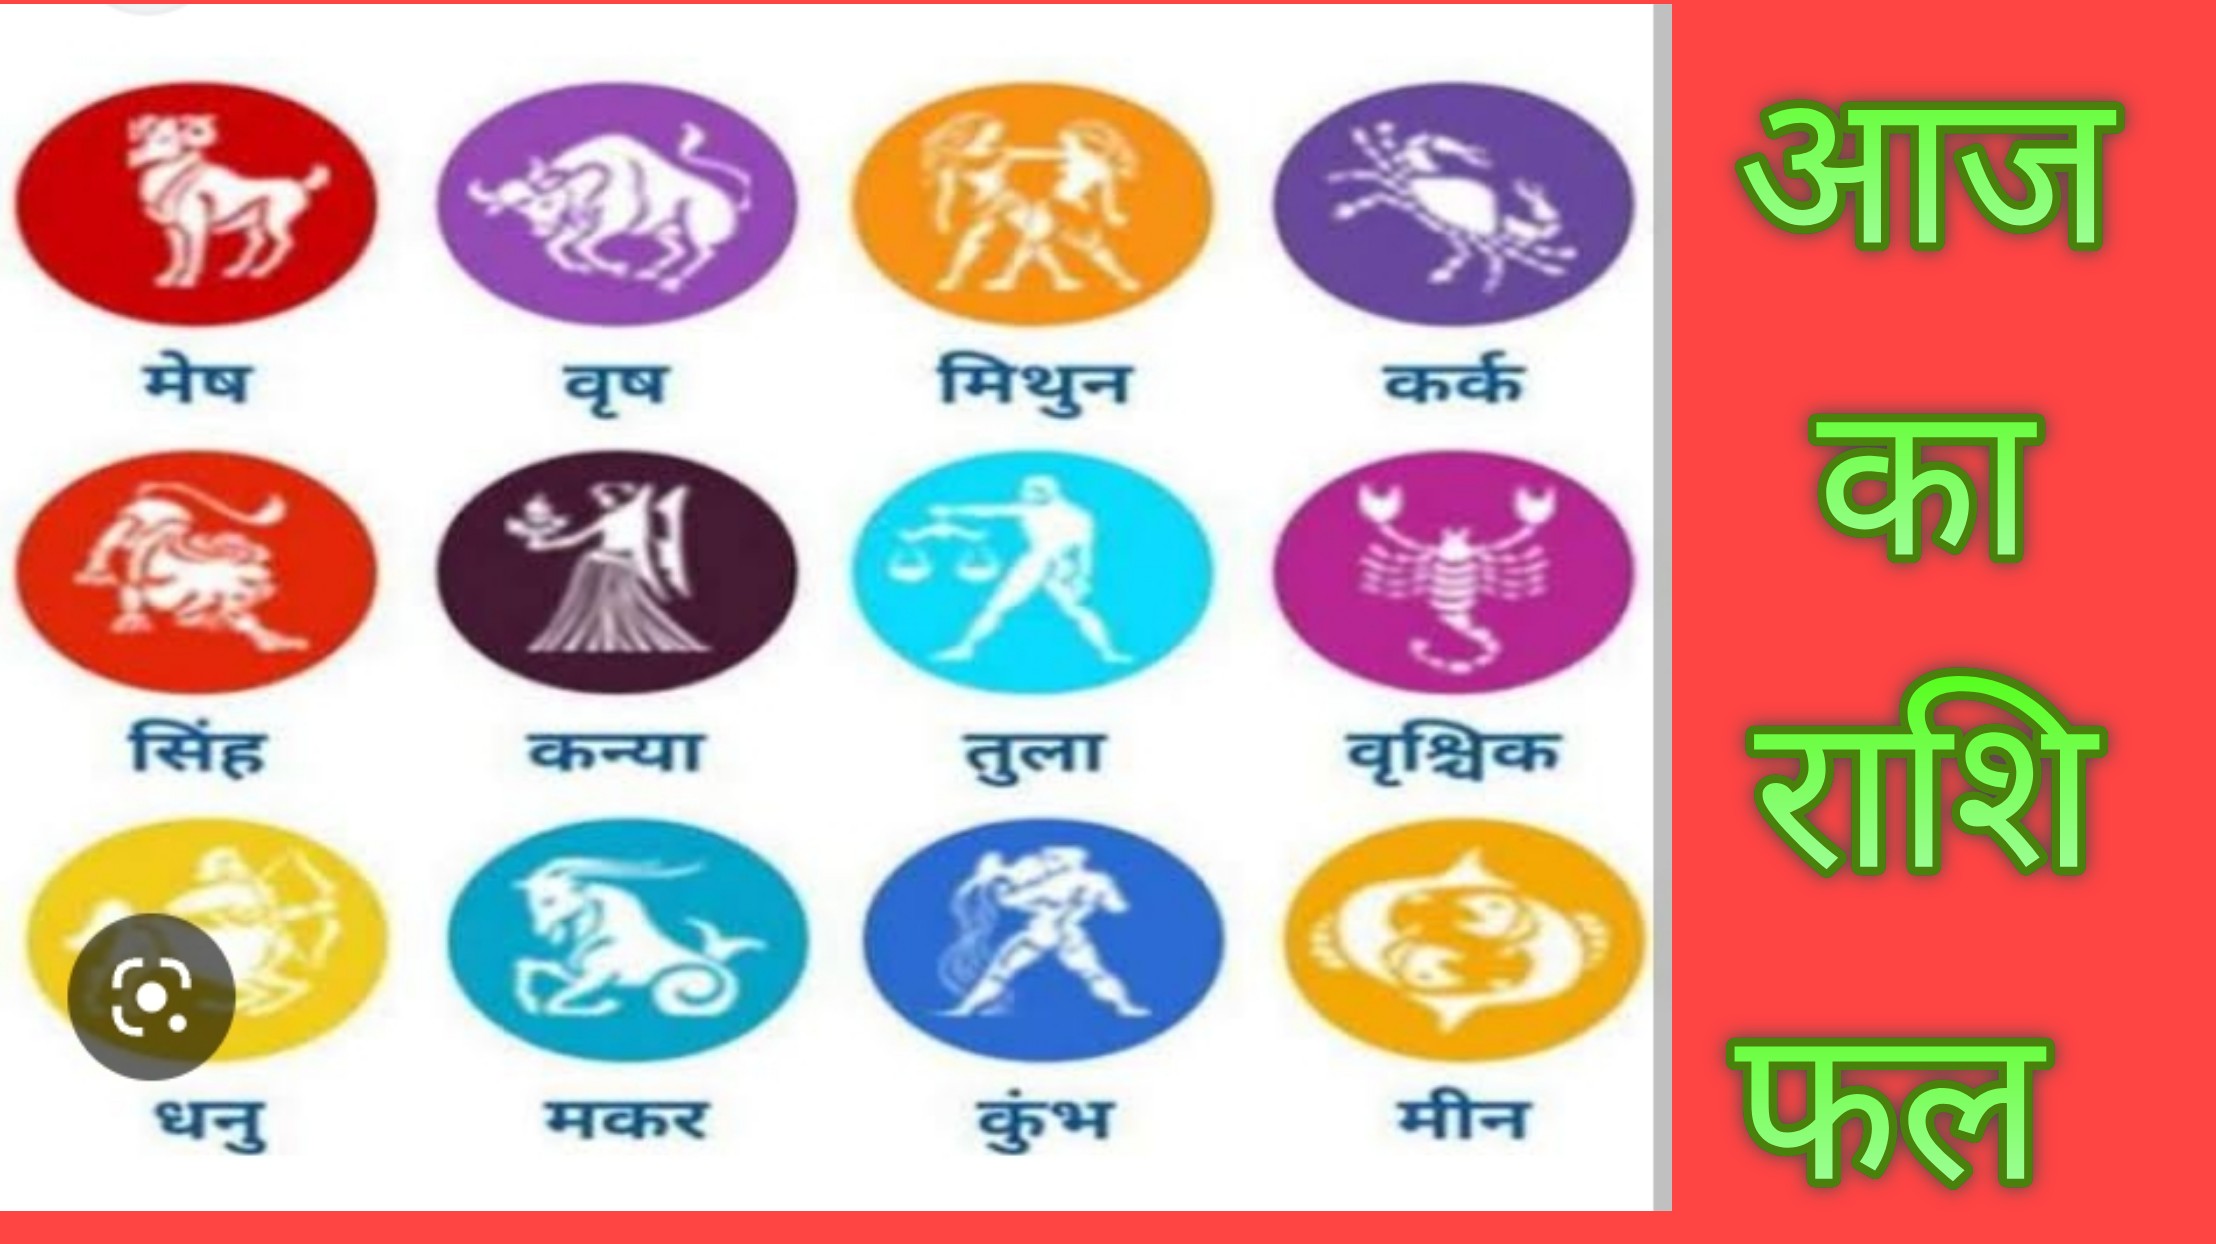 Horoscope of 12 zodiac signs today 2023: Know about your future